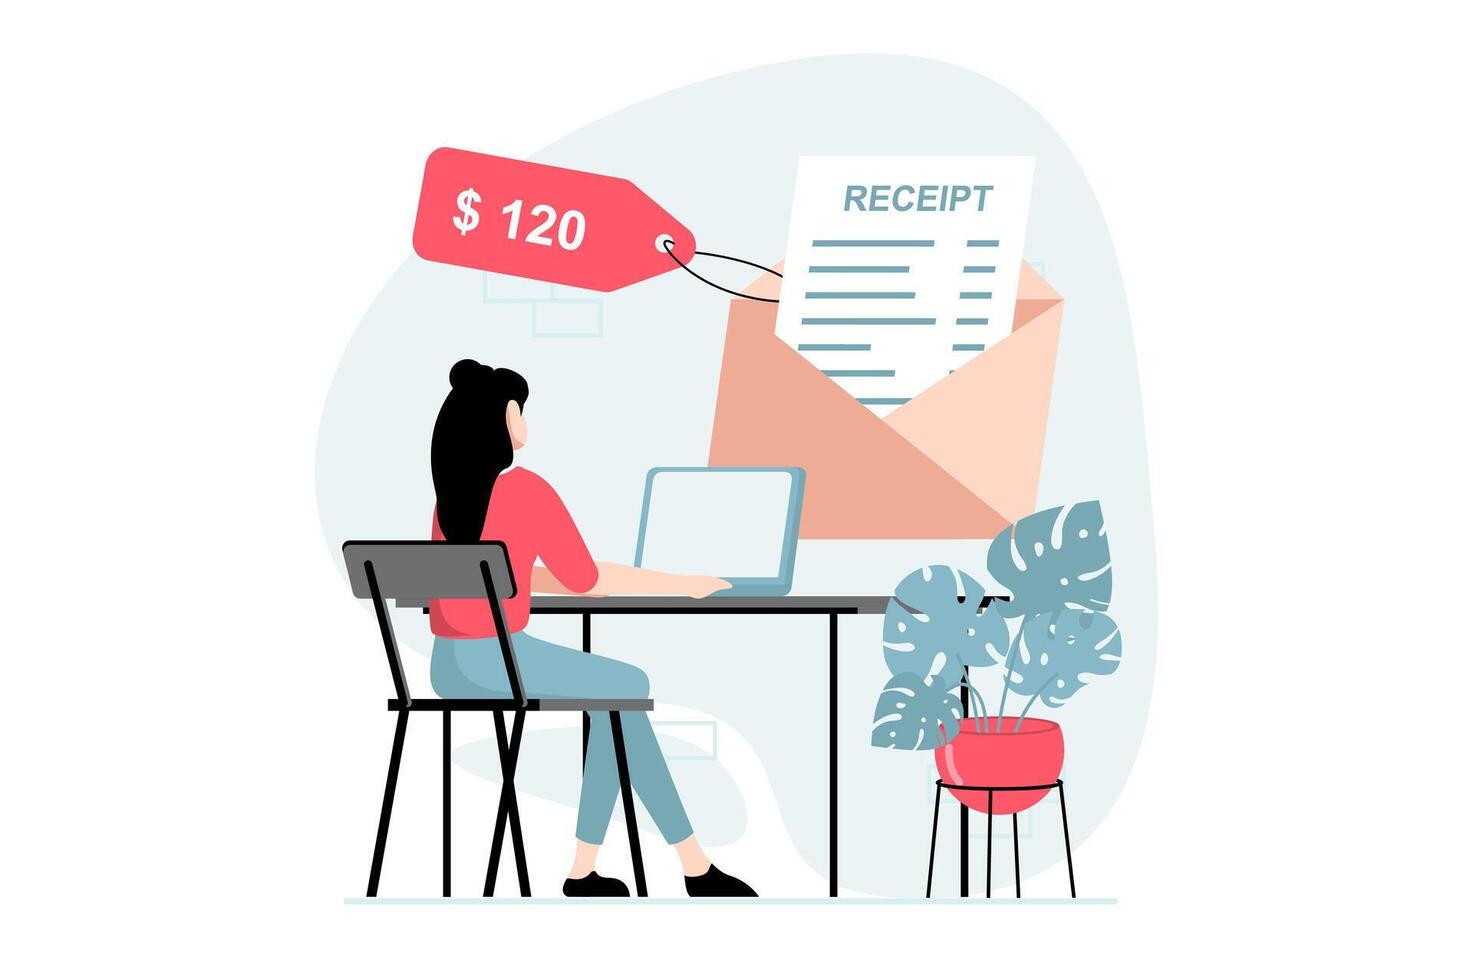 Electronic receipt concept with people scene in flat design. Woman making online shopping and receiving digital invoice, paying using credit card. illustration with character situation for web vector